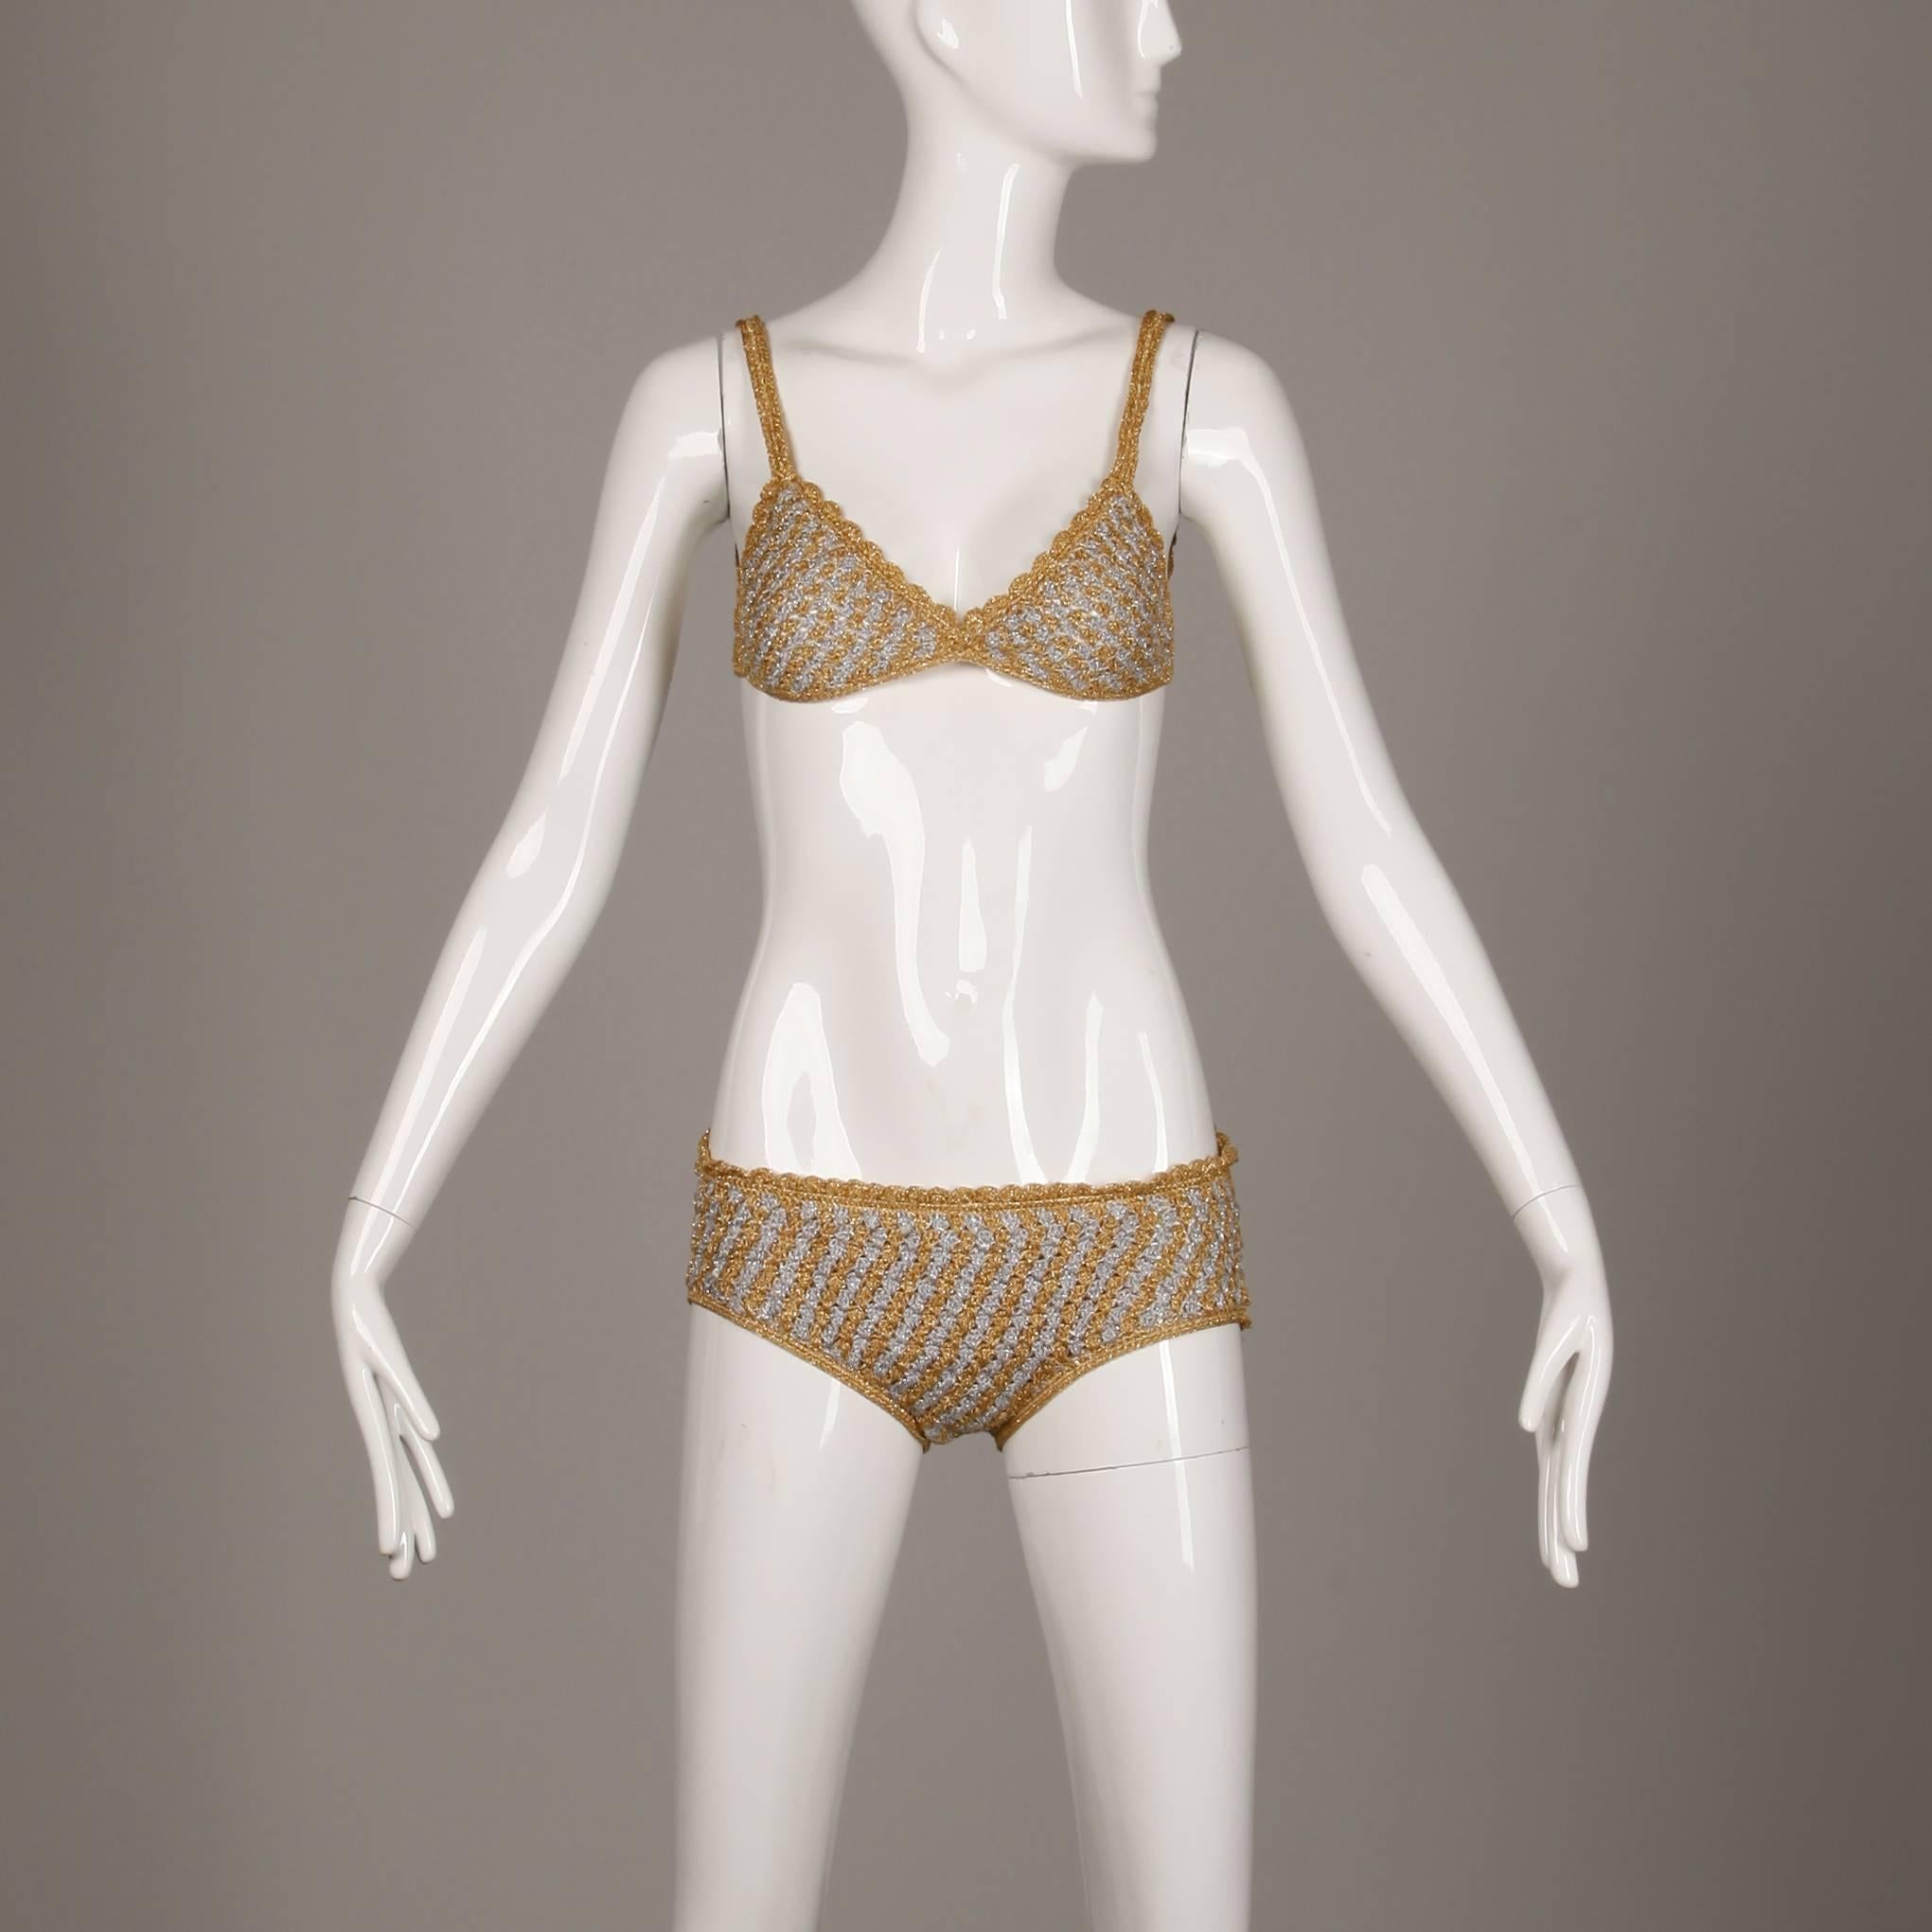 Bottom Lined
Top Unlined
Top Back Rings Closure
Marked Size: 12
Estimated Size: XS
Color: Gold/ Silver
Fabric: Metallic Yarn Crochet
Label: Moggie

Measurements: 

Bust: 32